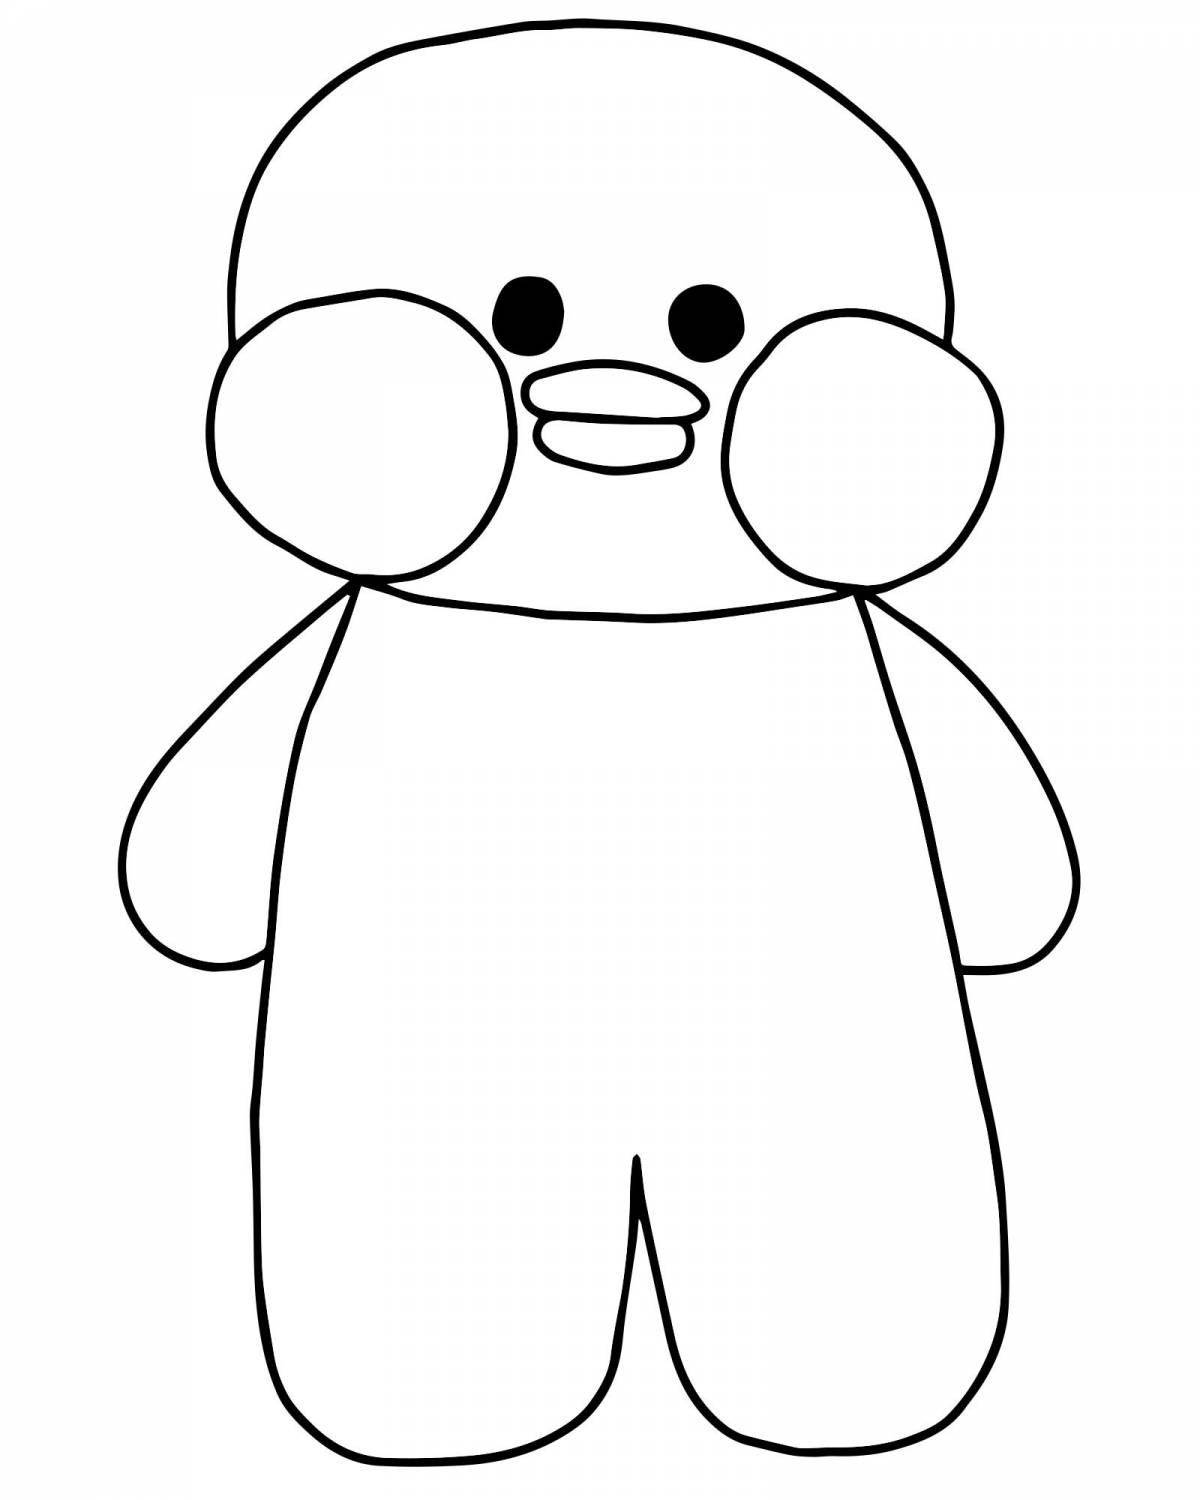 Colorful lolofan duck coloring page